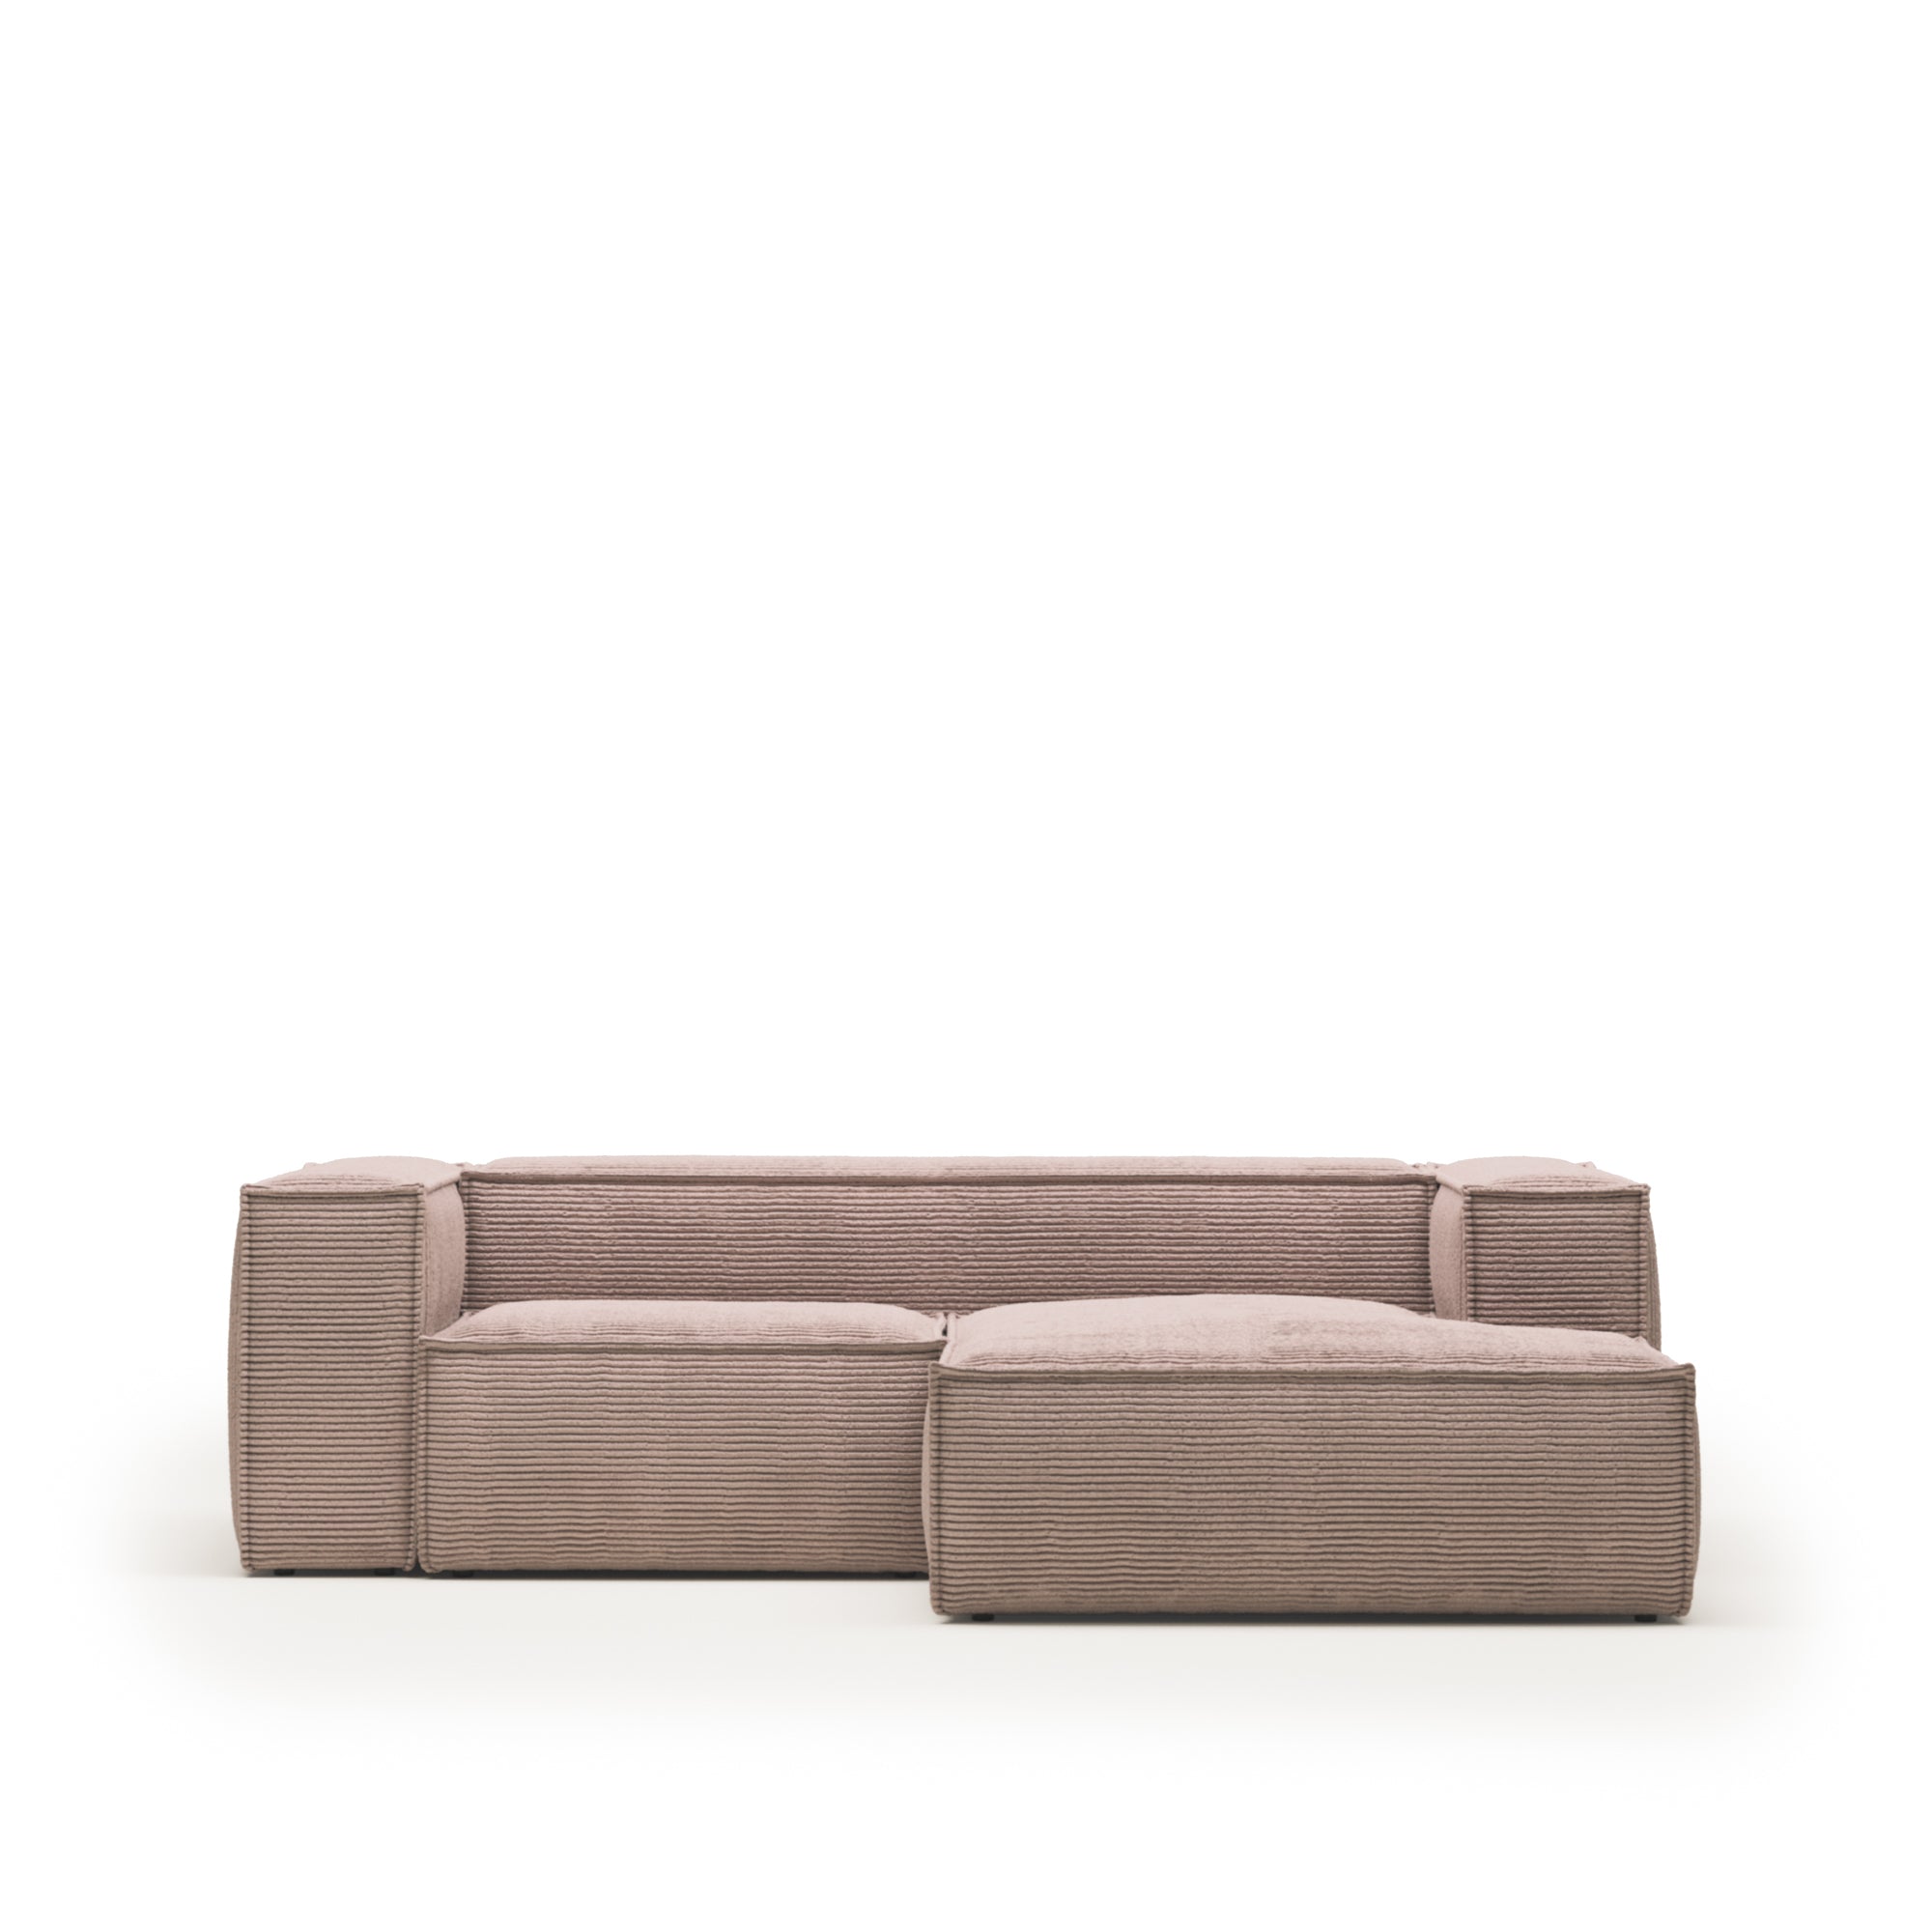 Blok 2 seater sofa with right side chaise longue in pink wide seam corduroy, 240 cm